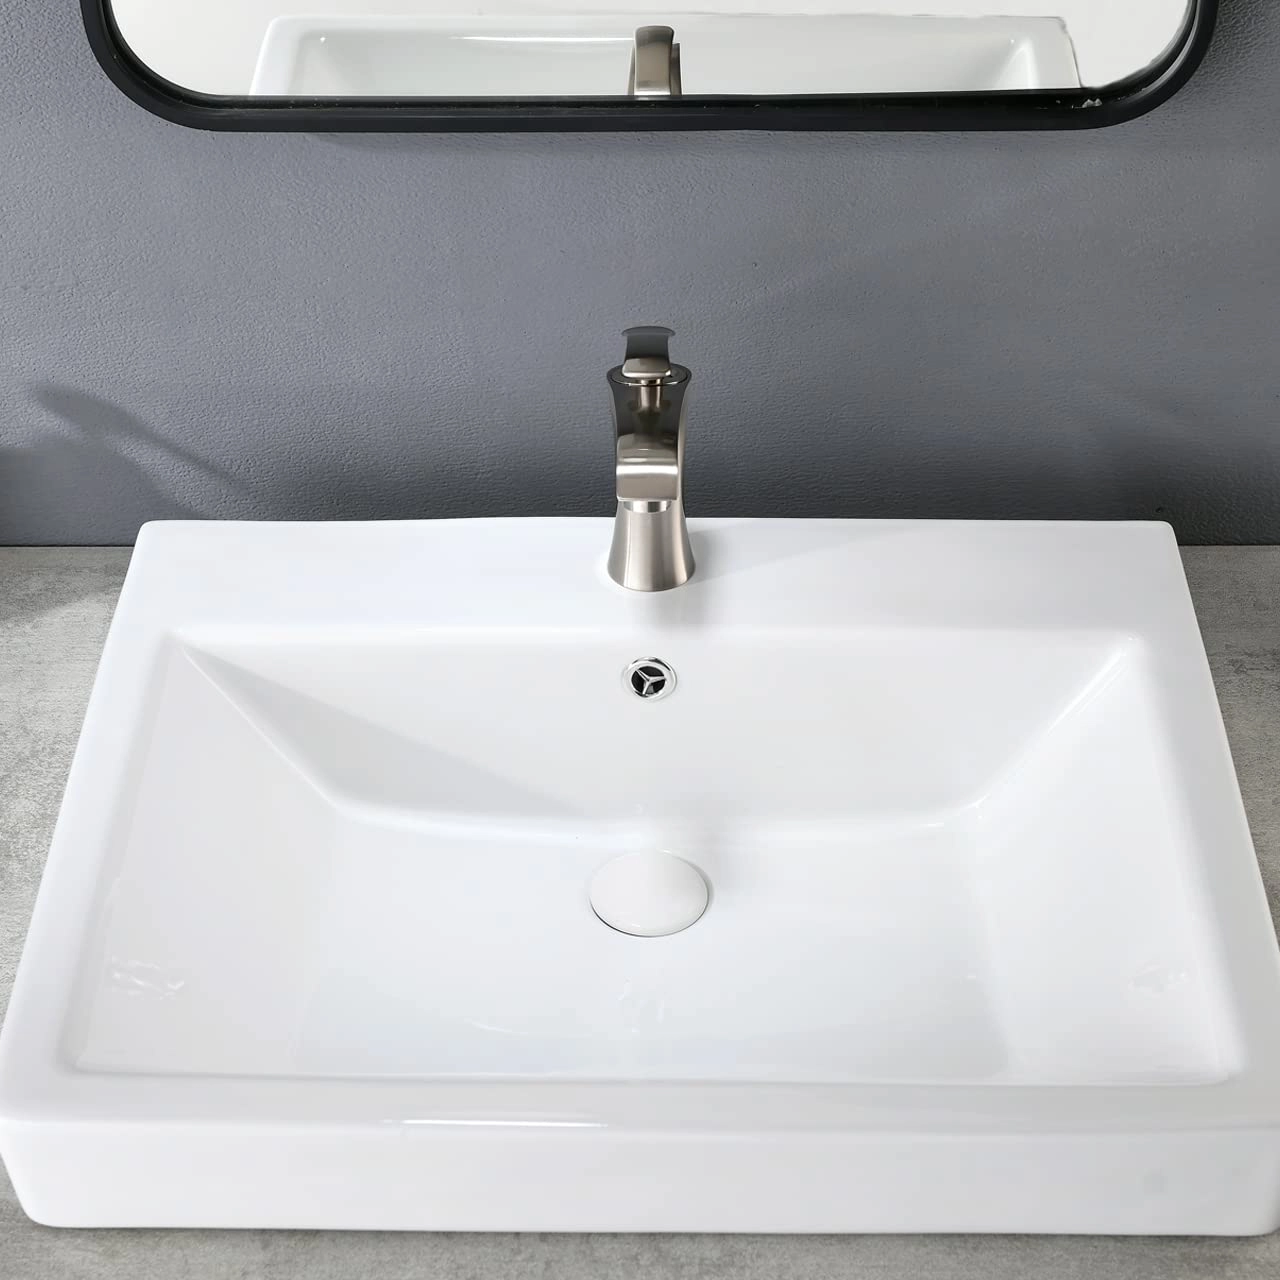 How to Choose the Perfect Ceramic Basin for Bathroom